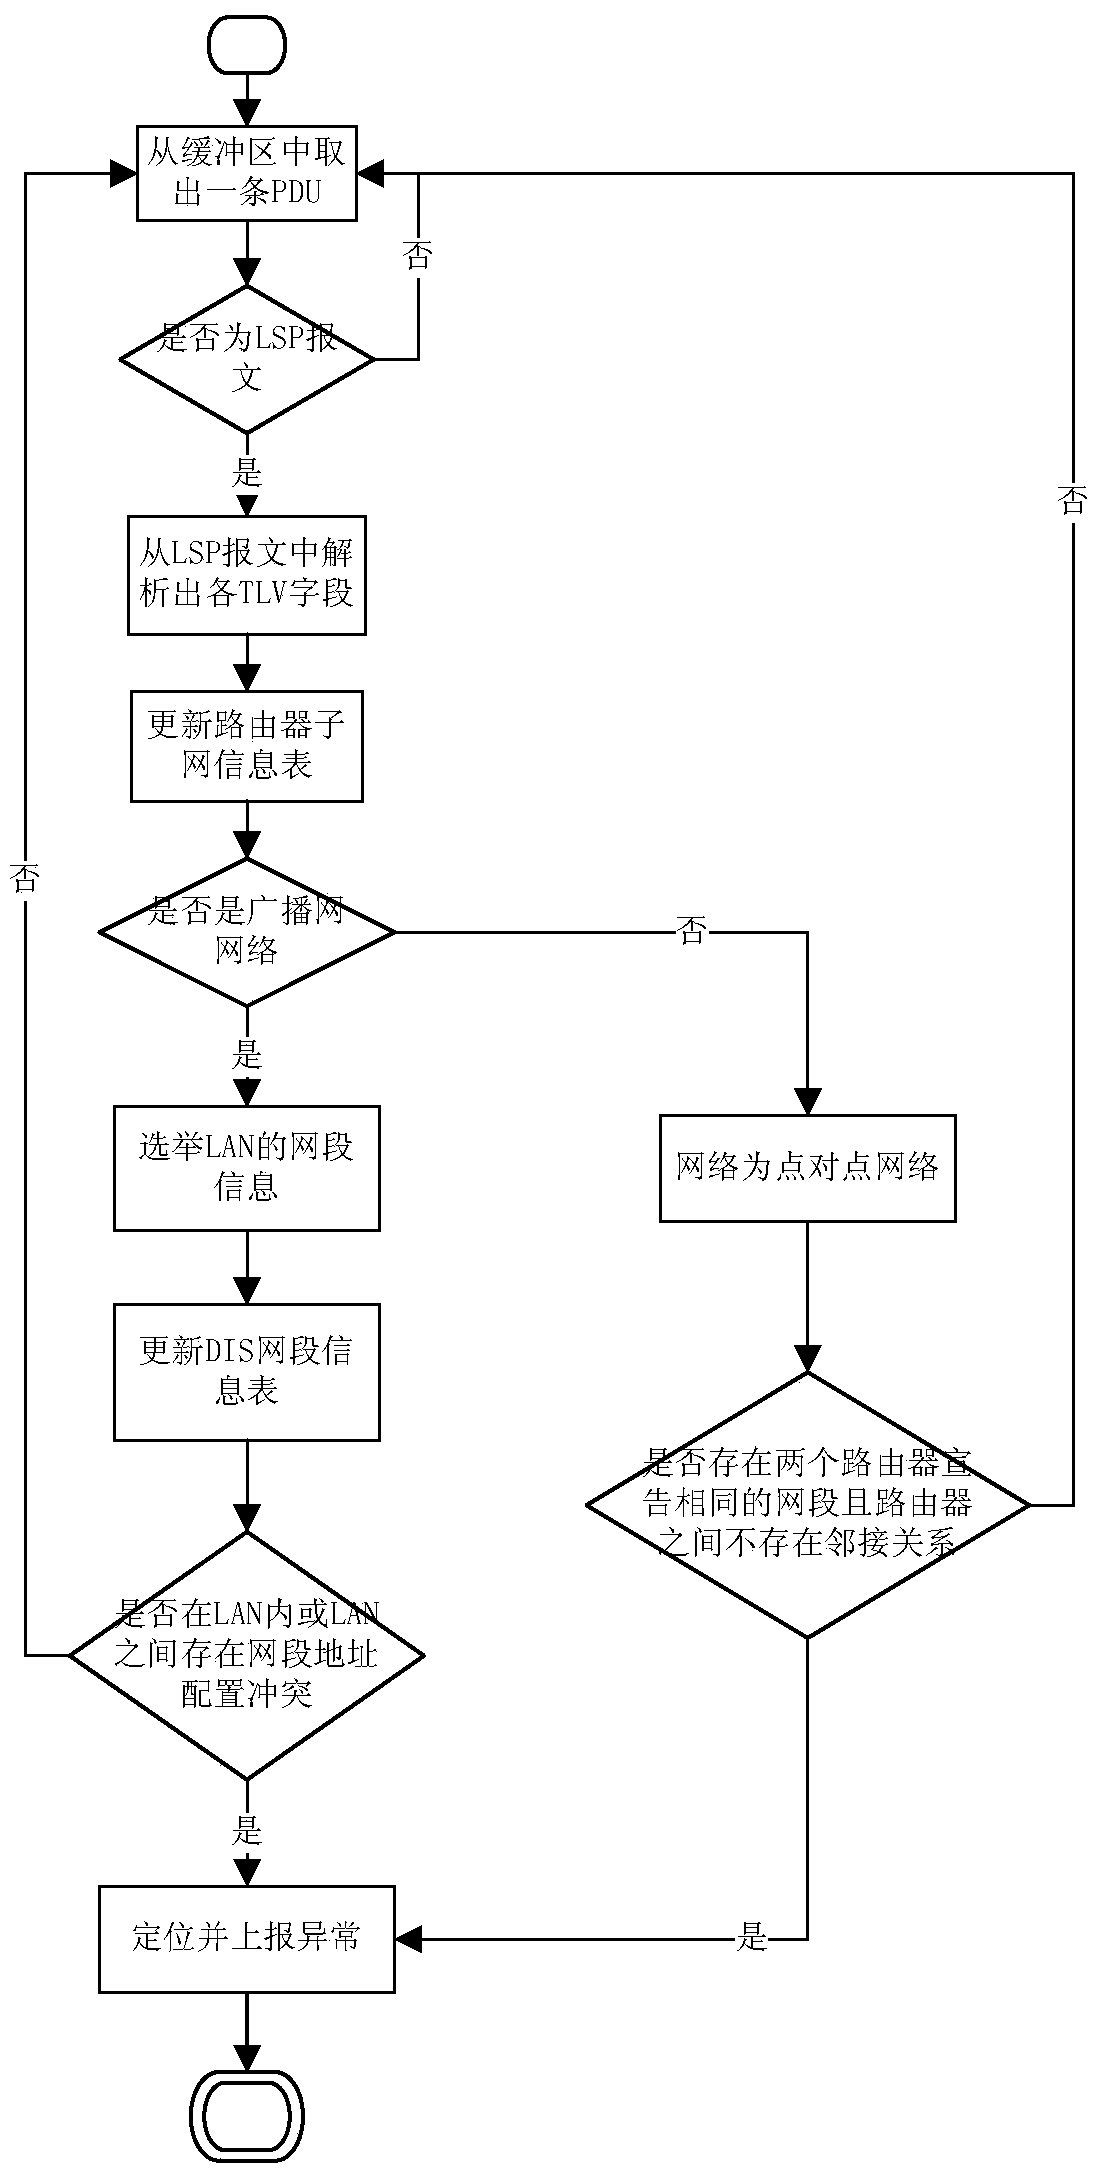 An is-isv6 network routing configuration anomaly detection system and method